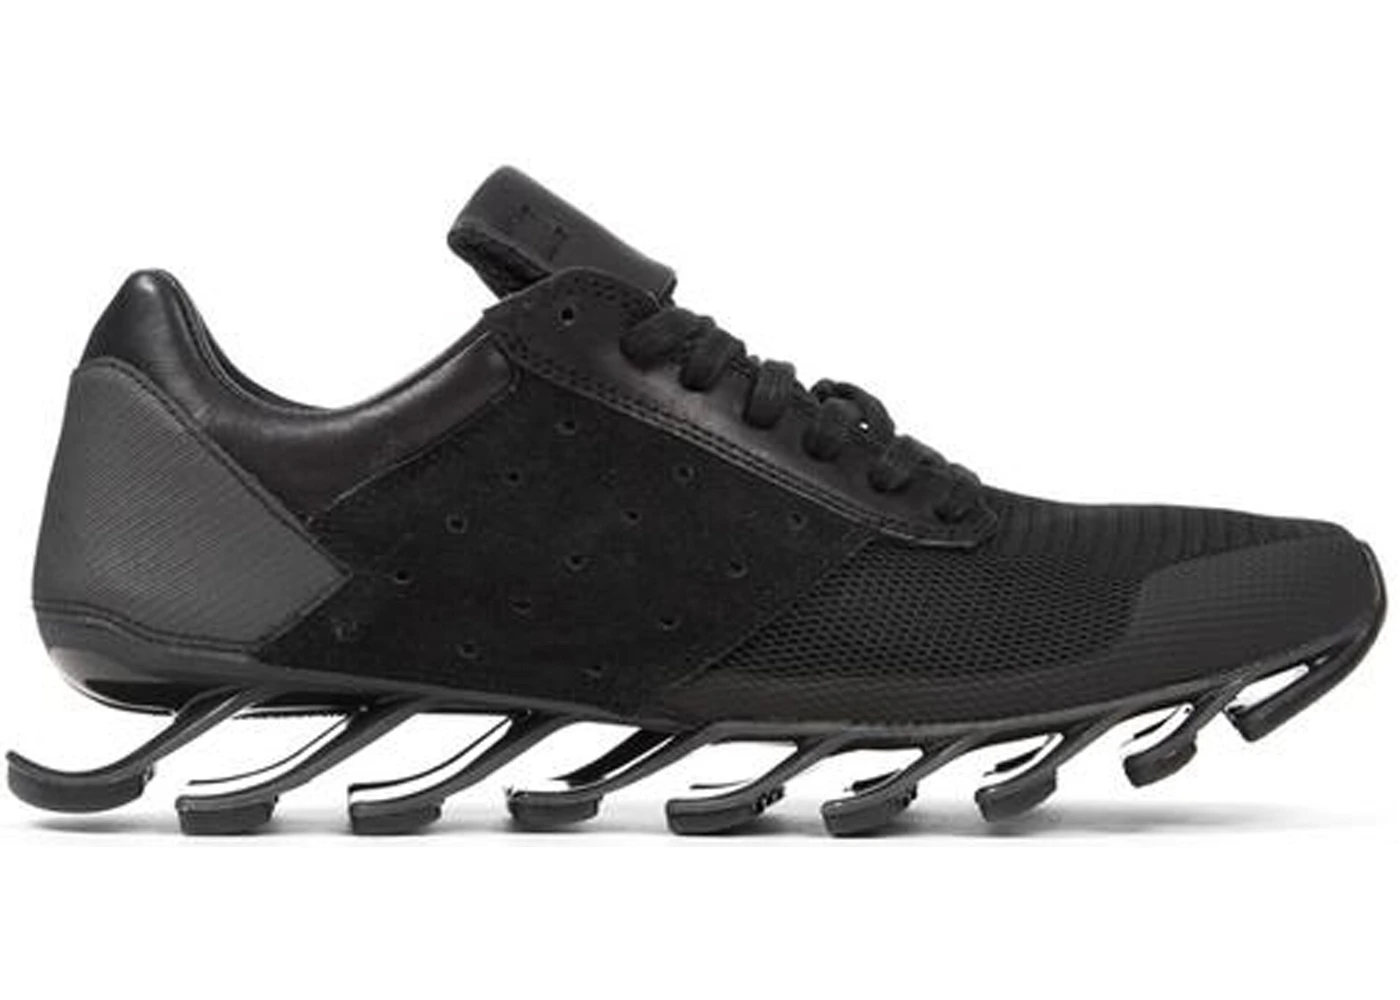 Grounds All kinds of Greenland adidas Springblade Low Rick Owens Black - B24018